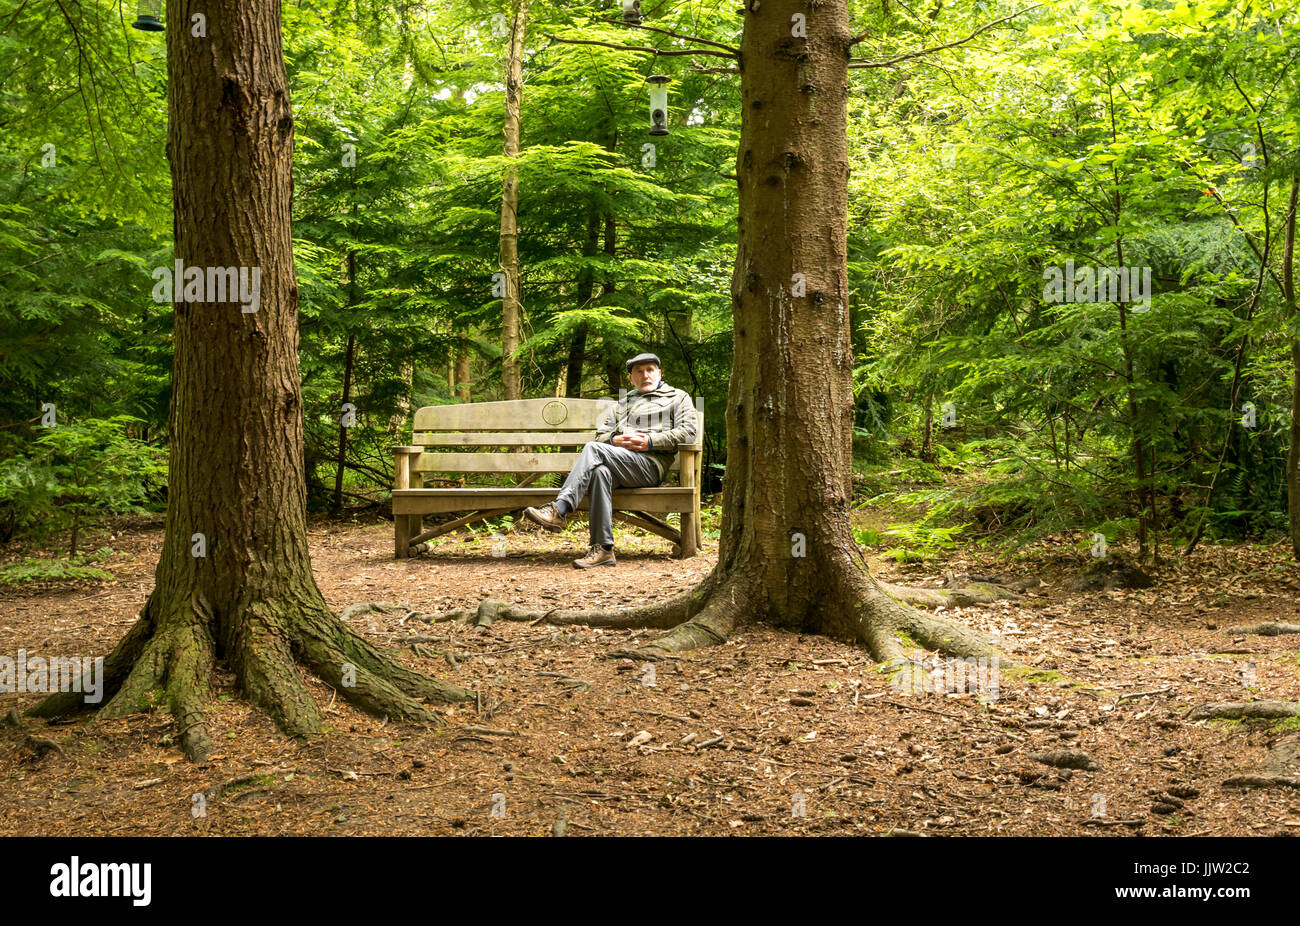 Older man with flat cap sitting on bench in woodland clearing watching bird feeders, Butterdean Wood, Woodland Trust, East Lothian, Scotland, UK Stock Photo